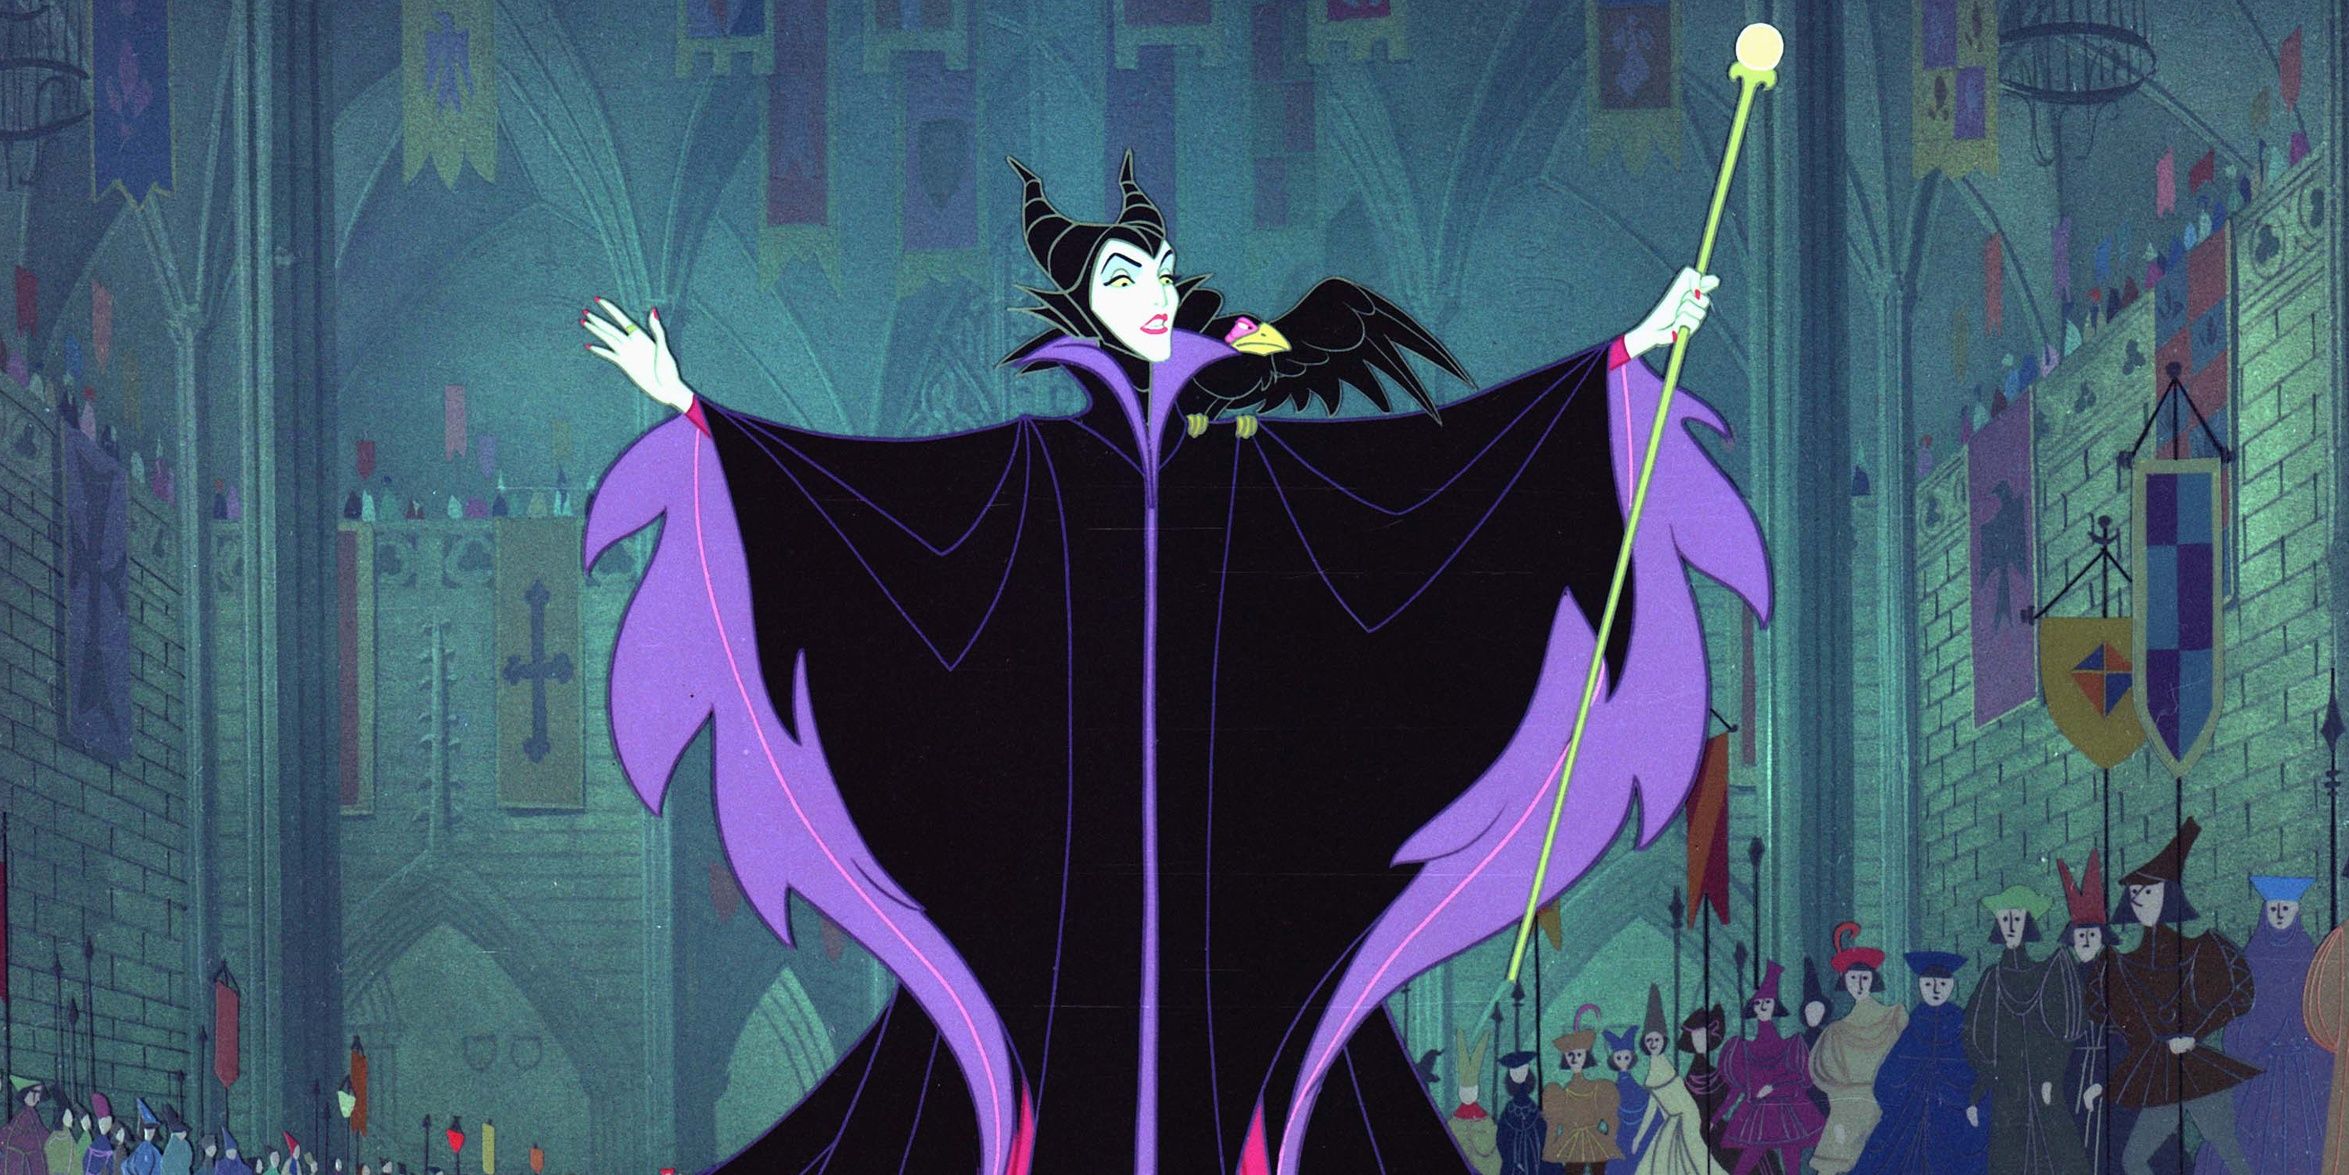 Eleanor Audley voicing Maleficent in Sleeping Beauty Stereotype Reinforcement